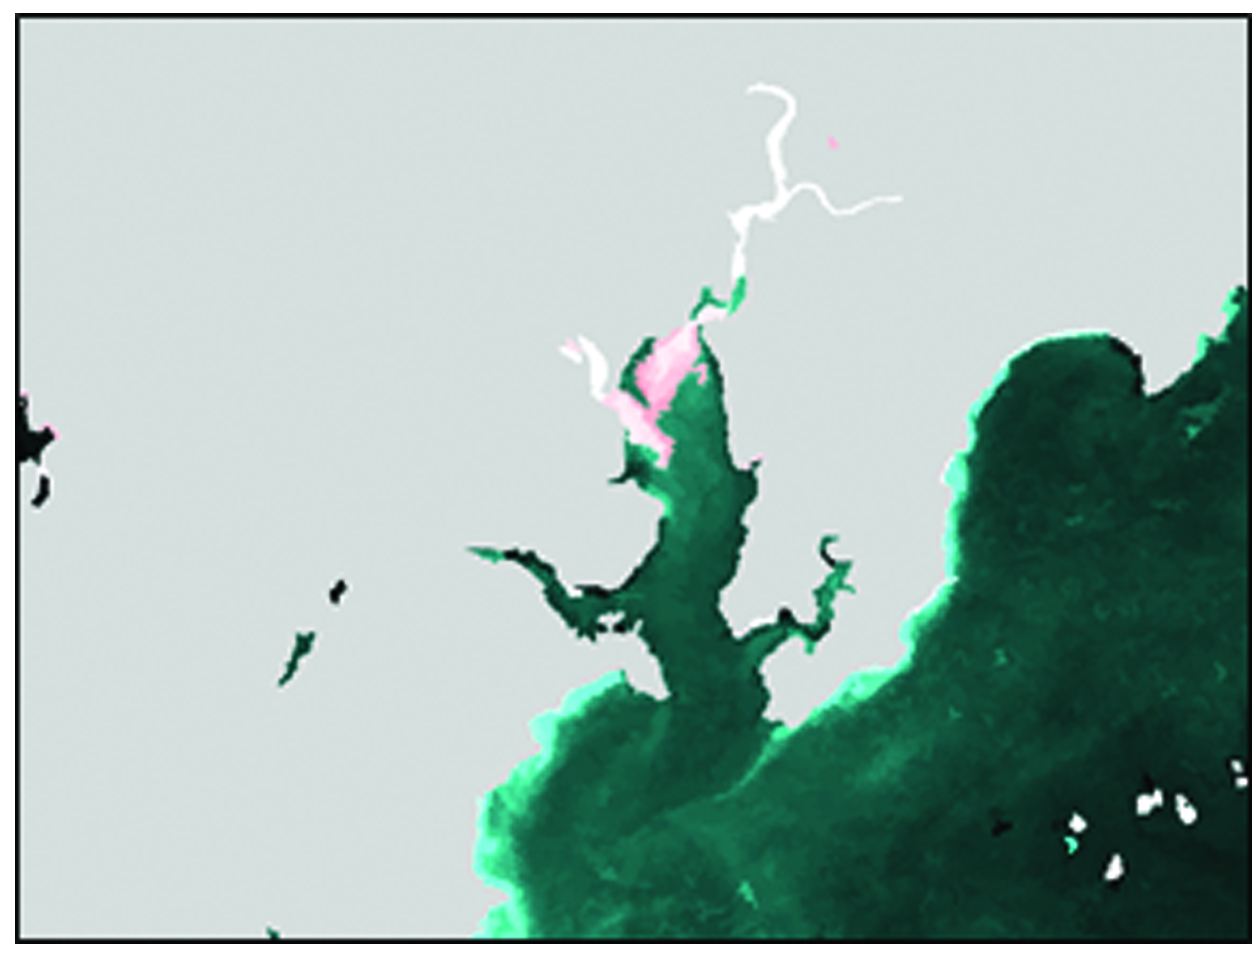 River plume extent determined using Landsat 8 data and image classification techniques. Mapped plume extent in red